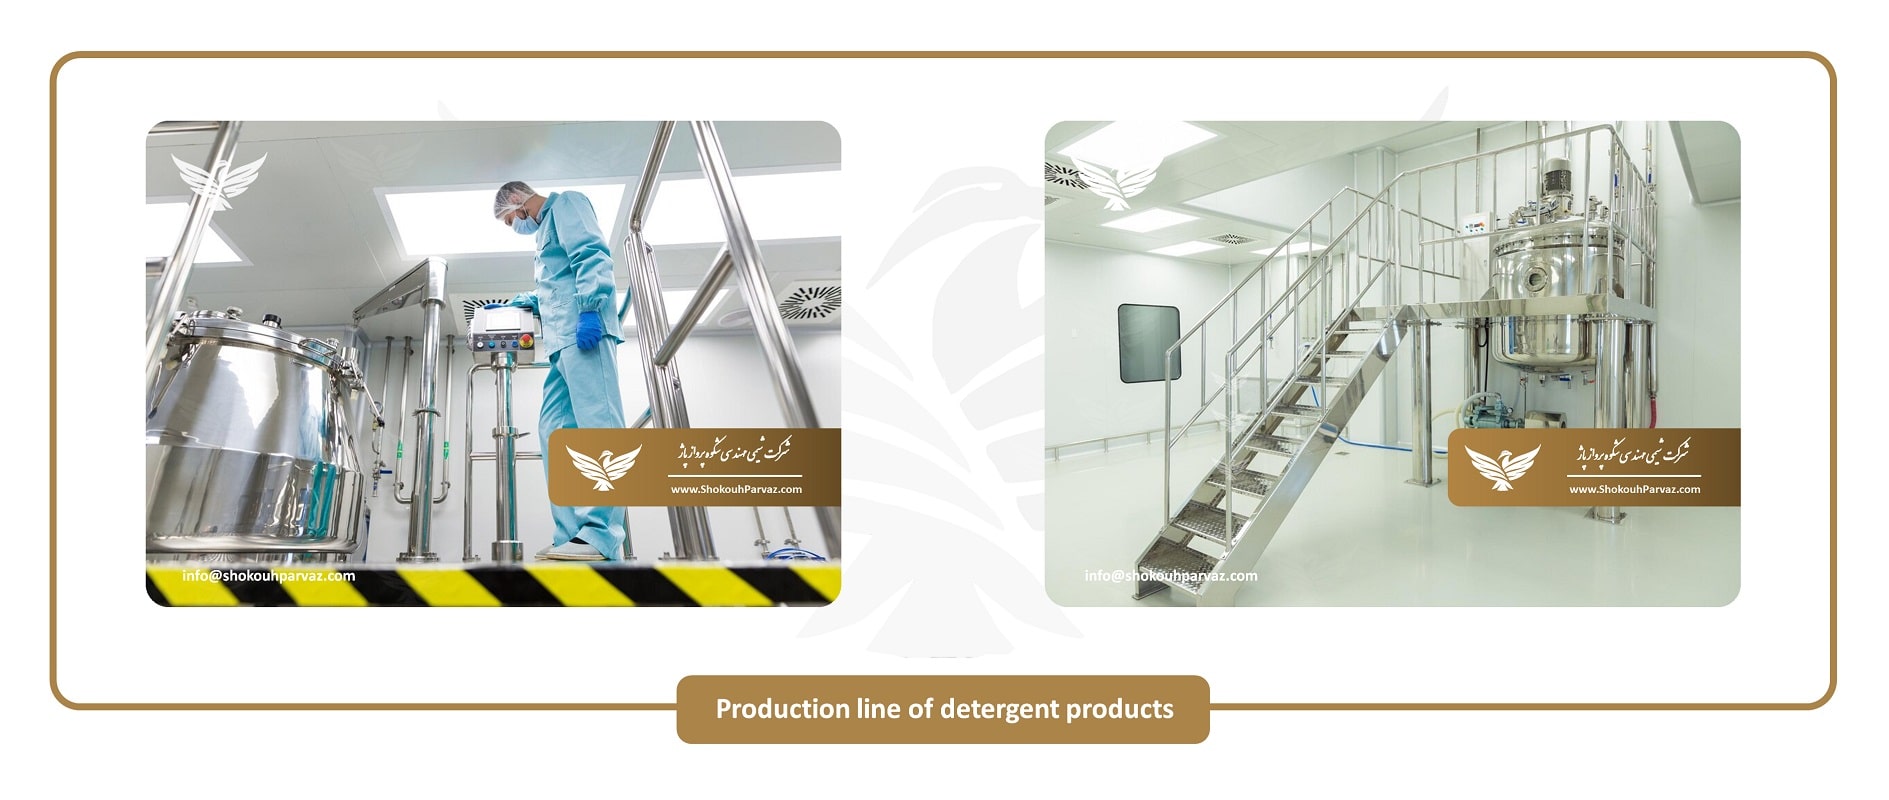 Production line of detergent products